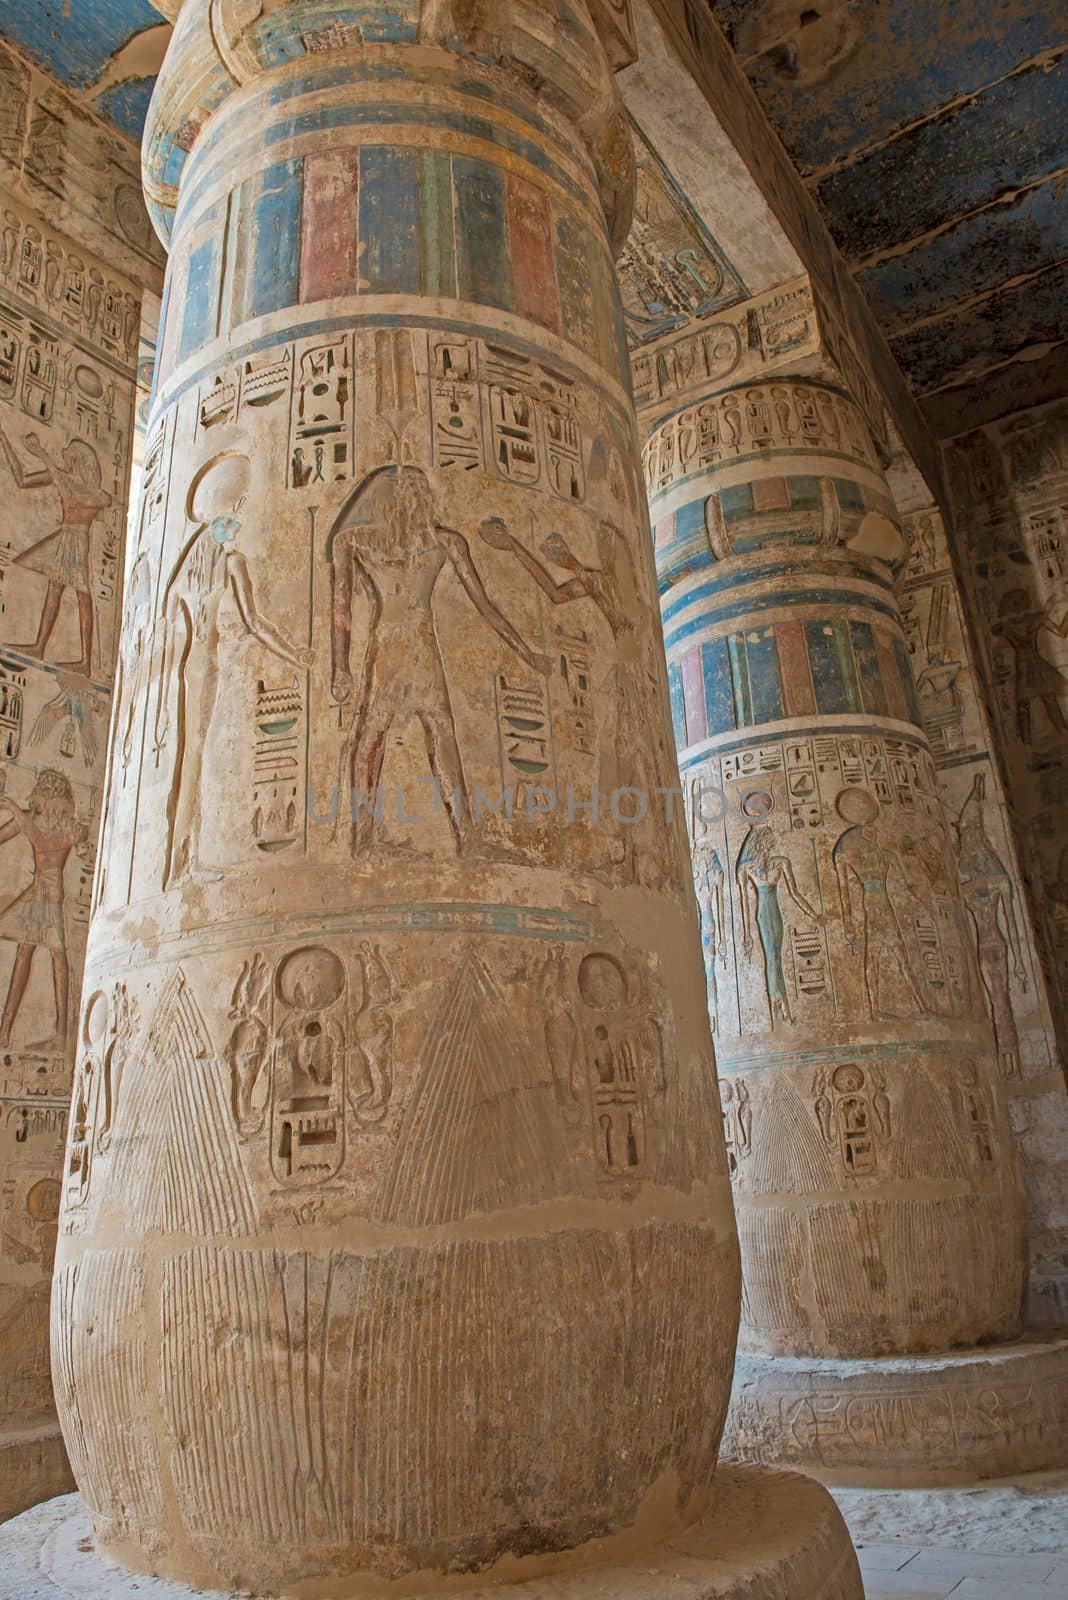 Hieroglypic carvings on columns at the ancient egyptian Medinat Habu Temple in Luxor Egypt